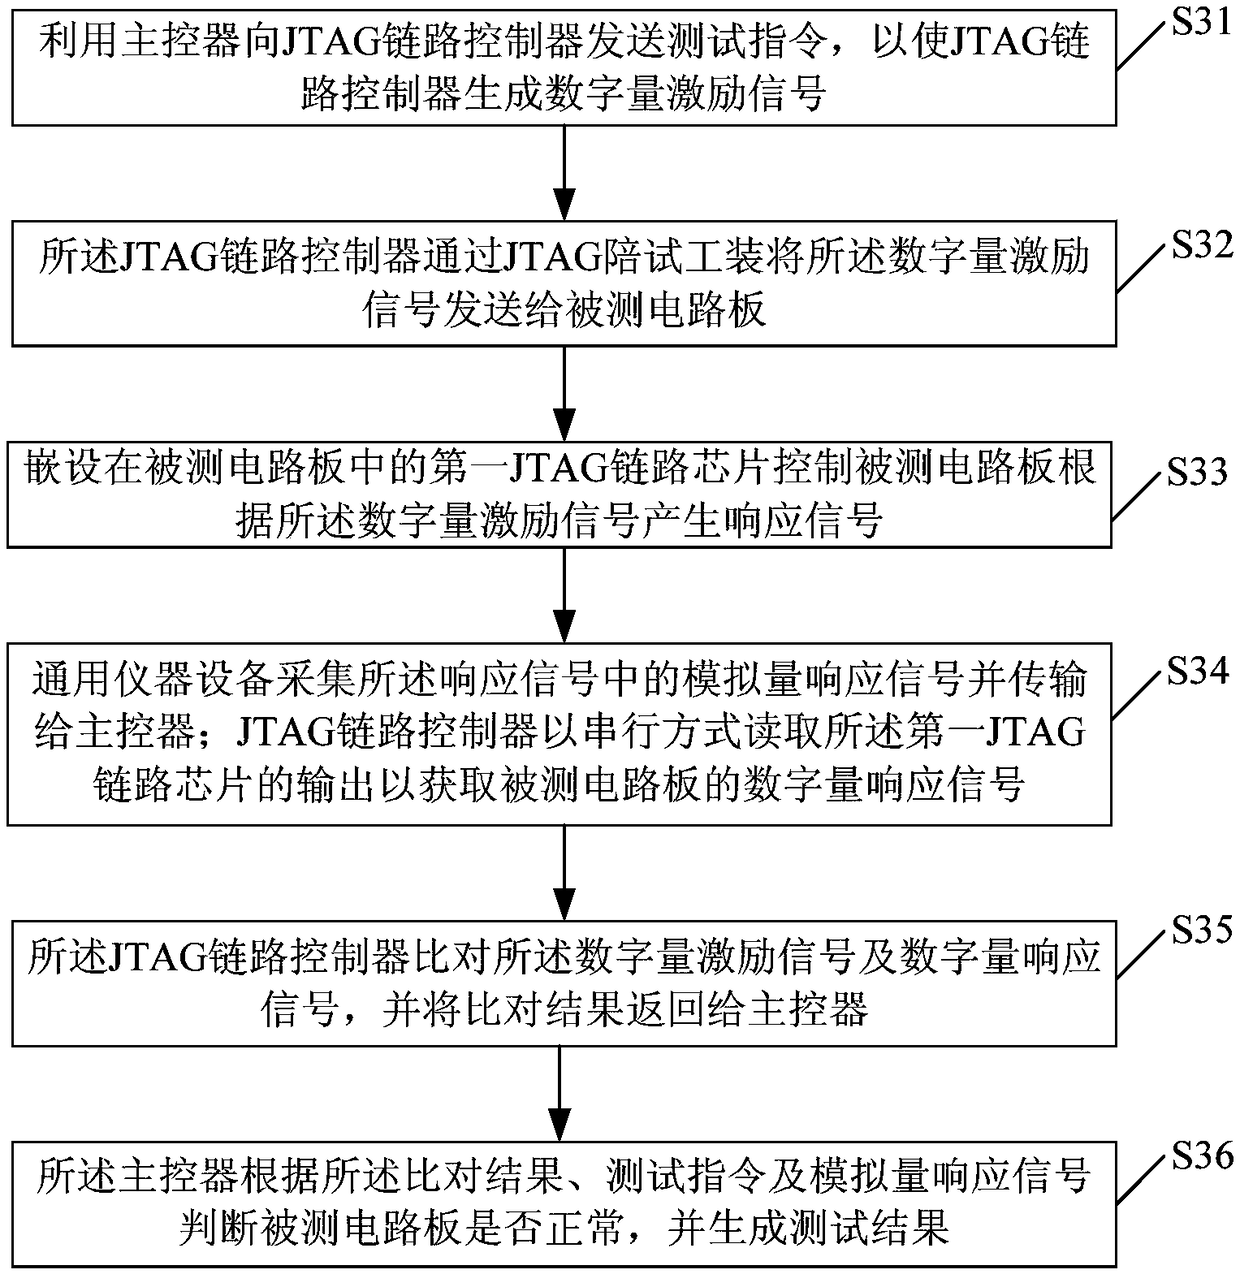 JTAG link based circuit board test system and method